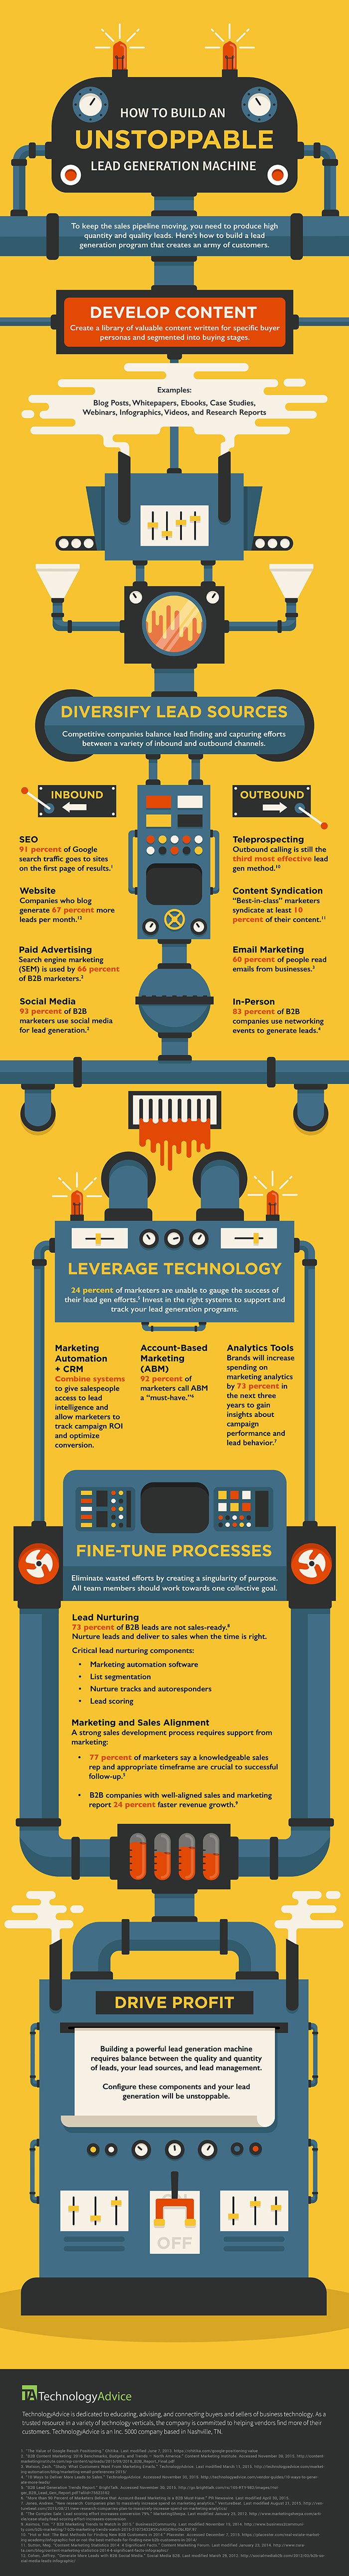 Generate More Leads Infographic